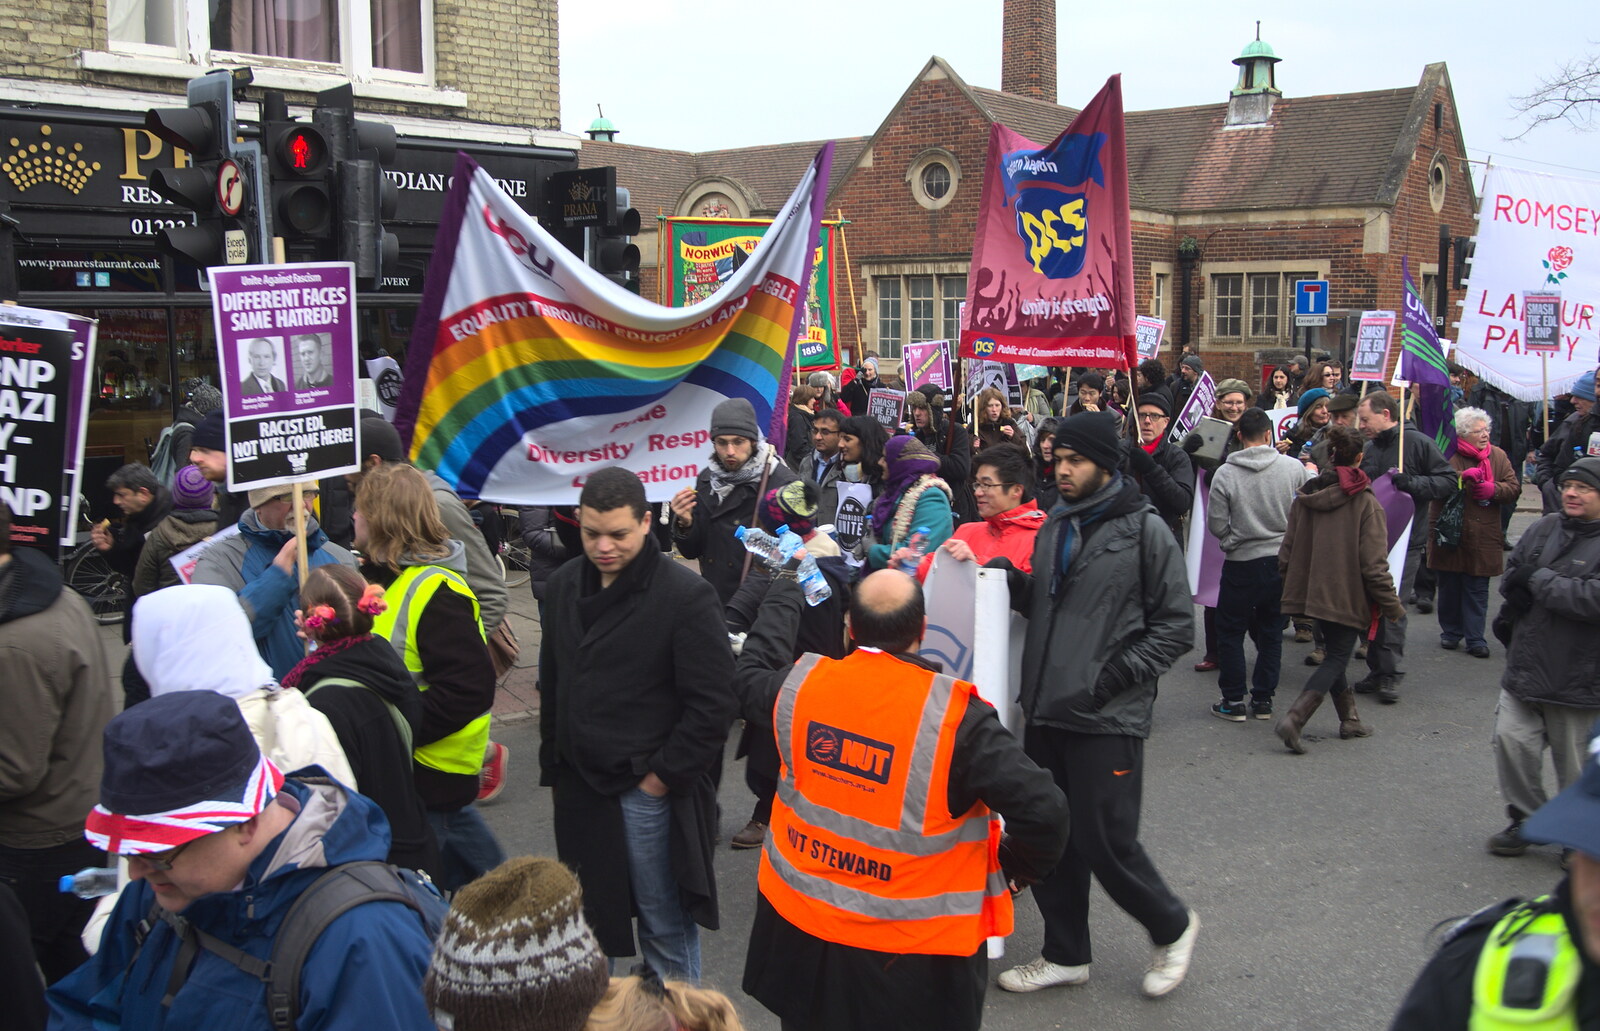 Rainbow flags from An Anti-Fascist March, Mill Road, Cambridge - 23rd February 2013